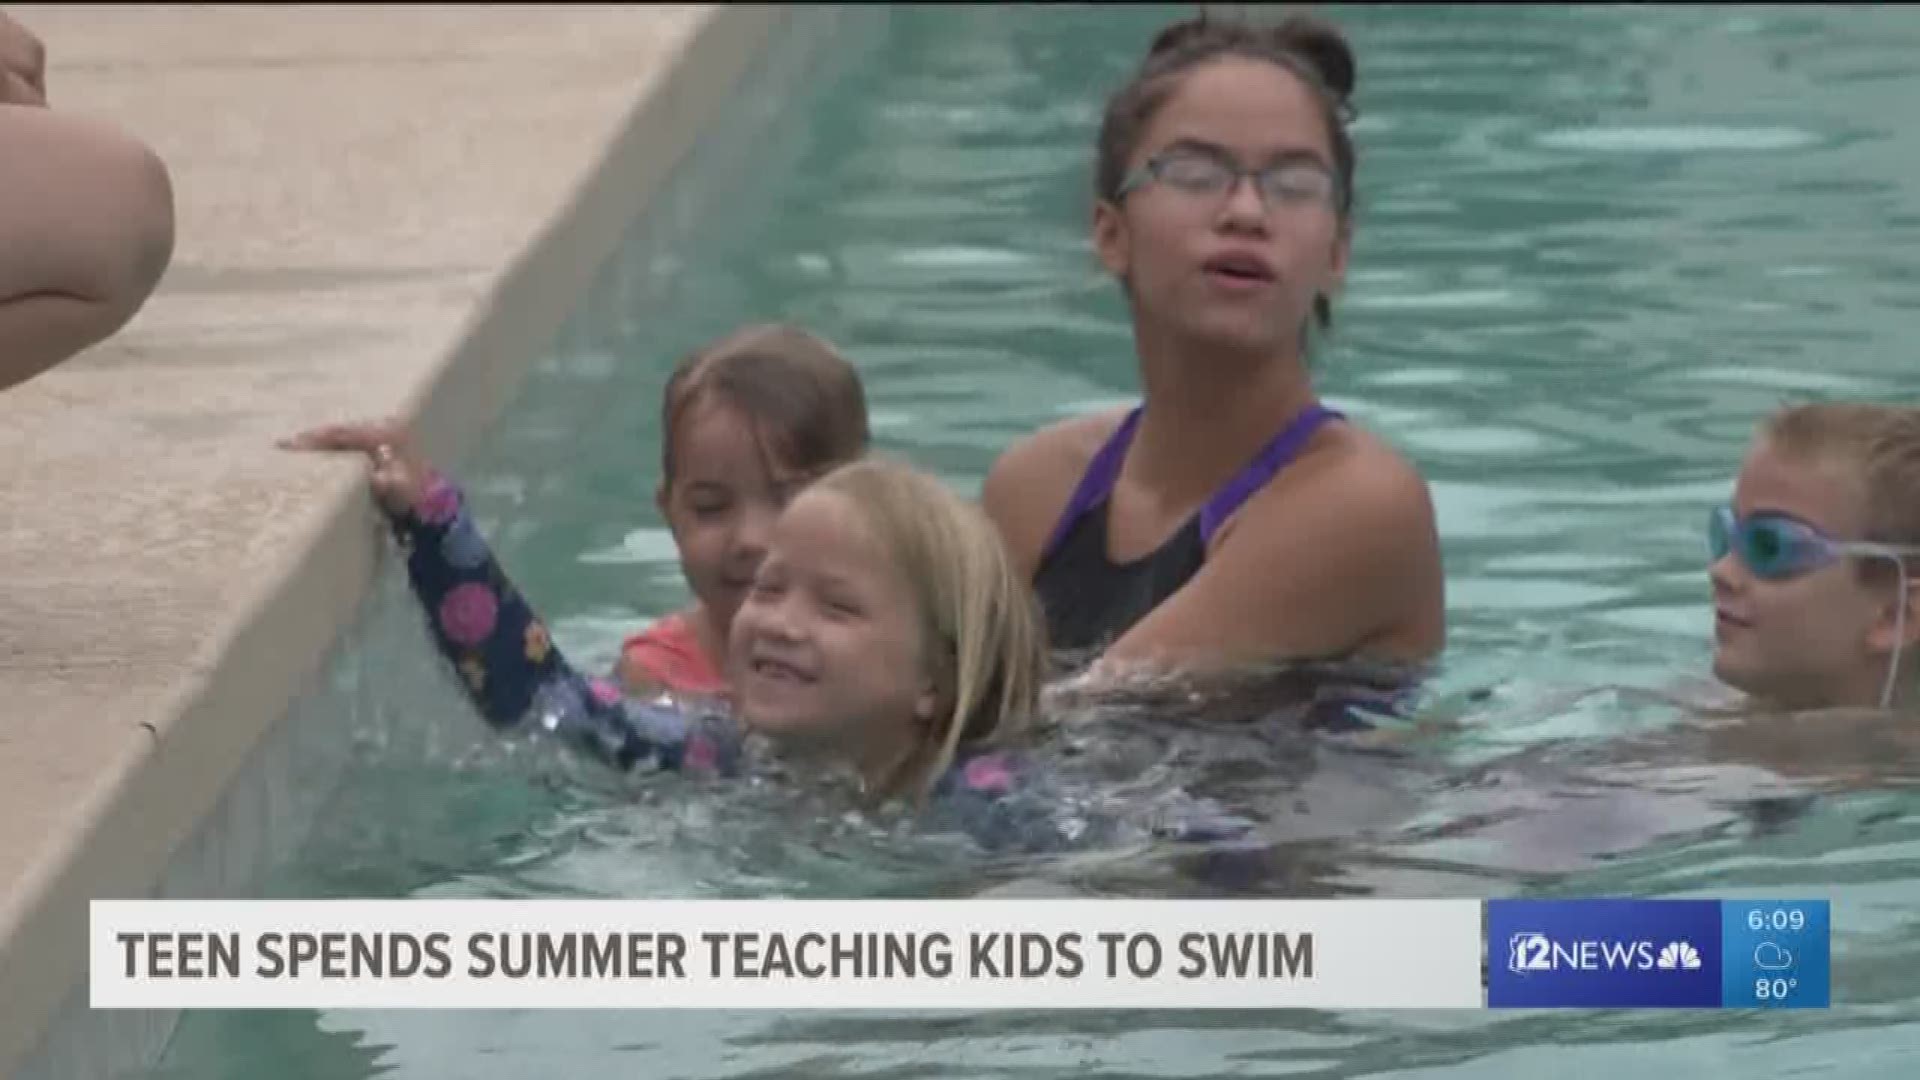 15-year-old Monique Girle is giving underprivileged kids free swim lessons.